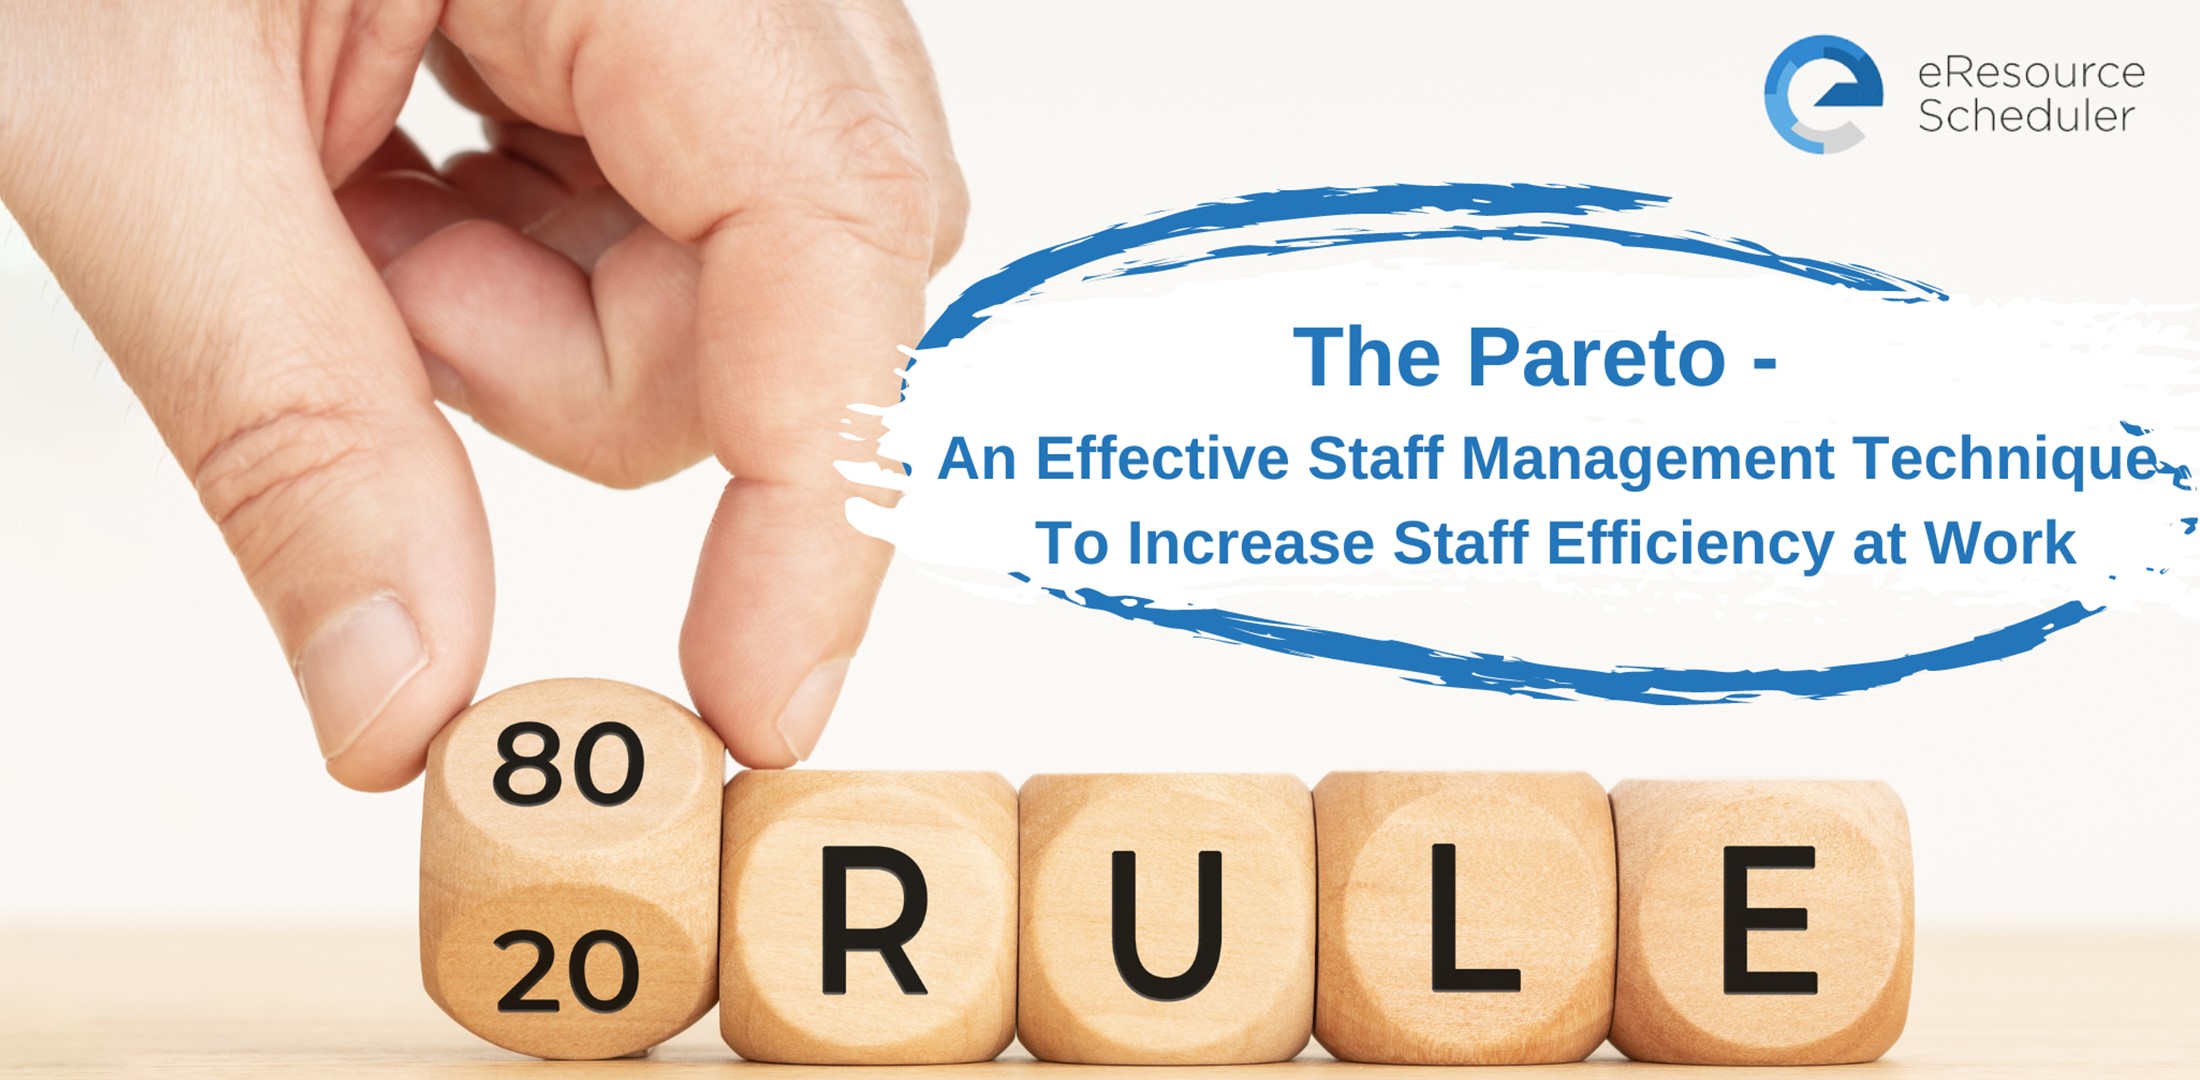 The Pareto - An Effective Staff Management Technique to Increase Staff Efficiency at Work